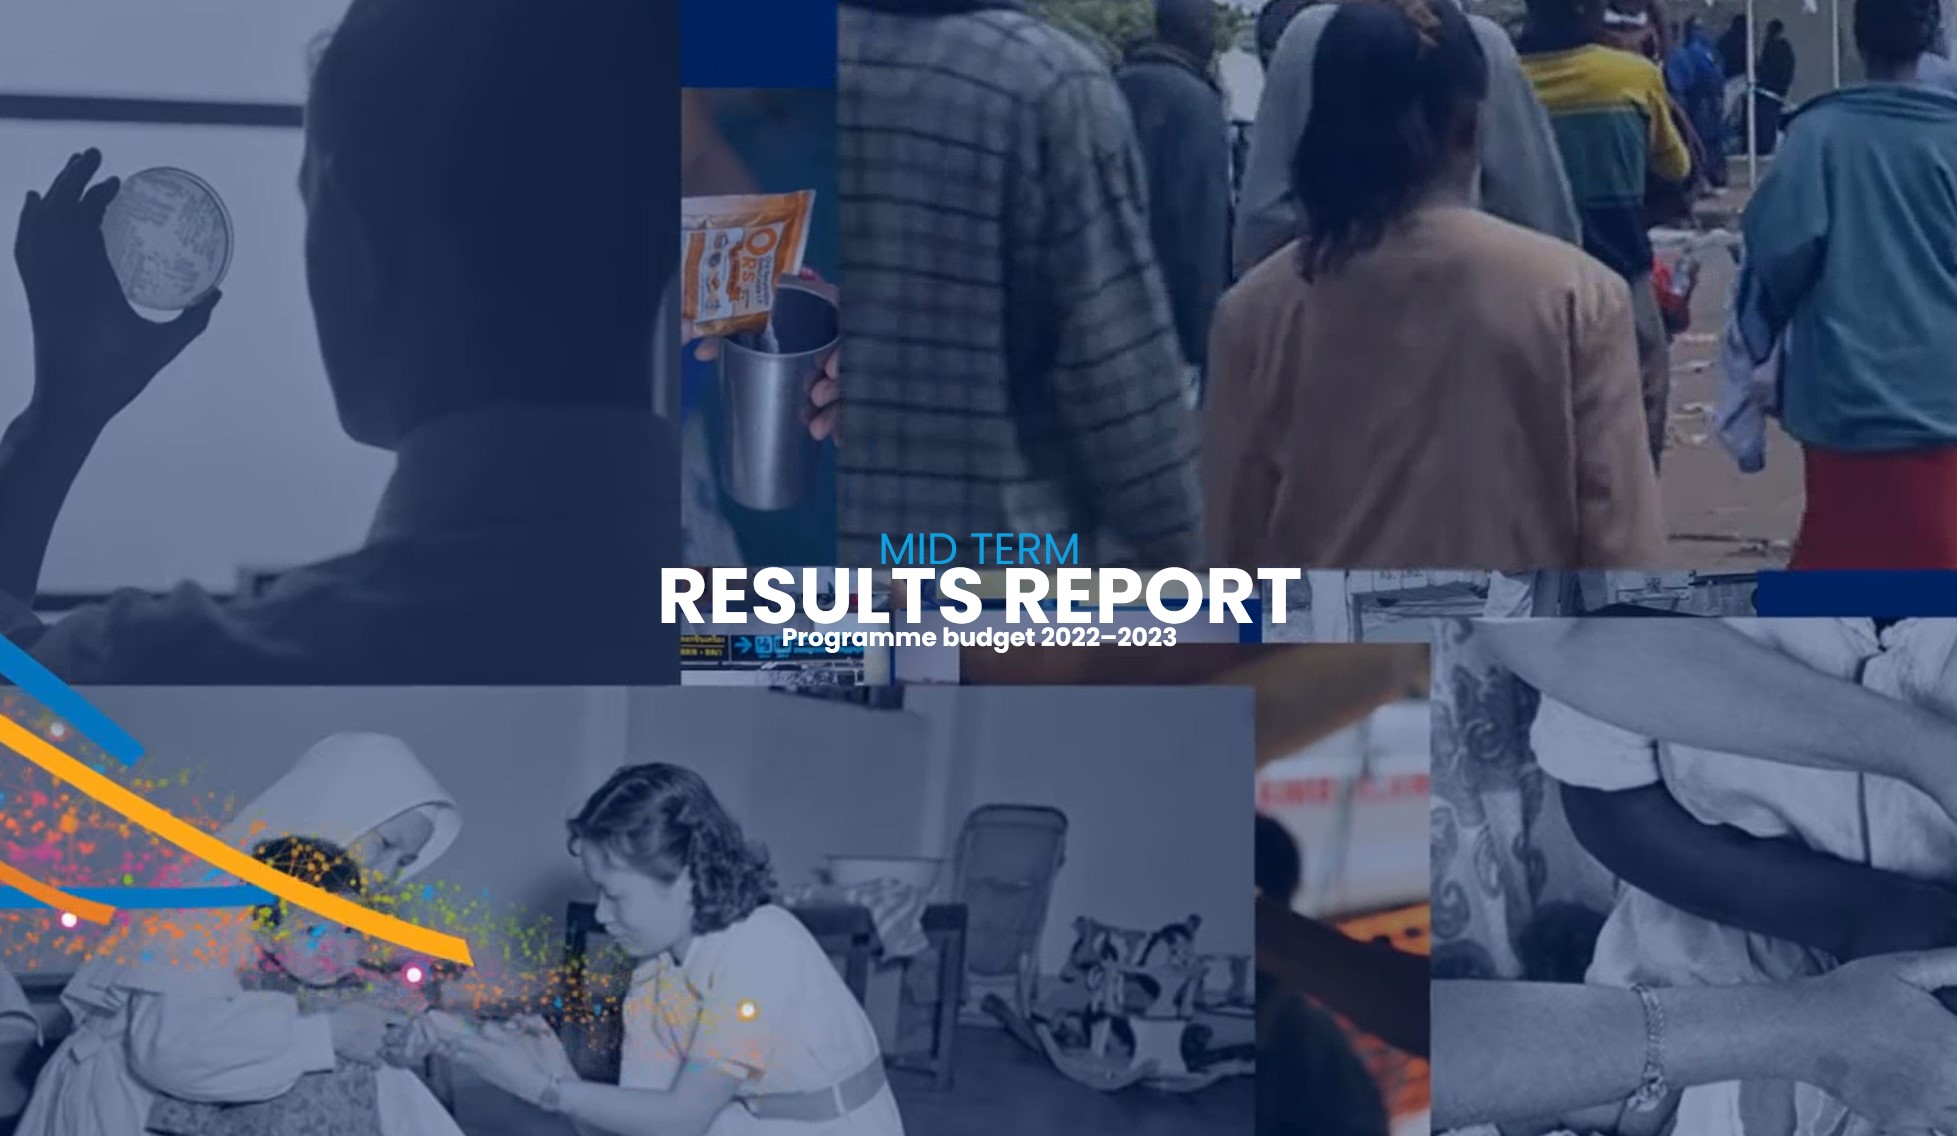 WHO Mid-Term Results Report 2022